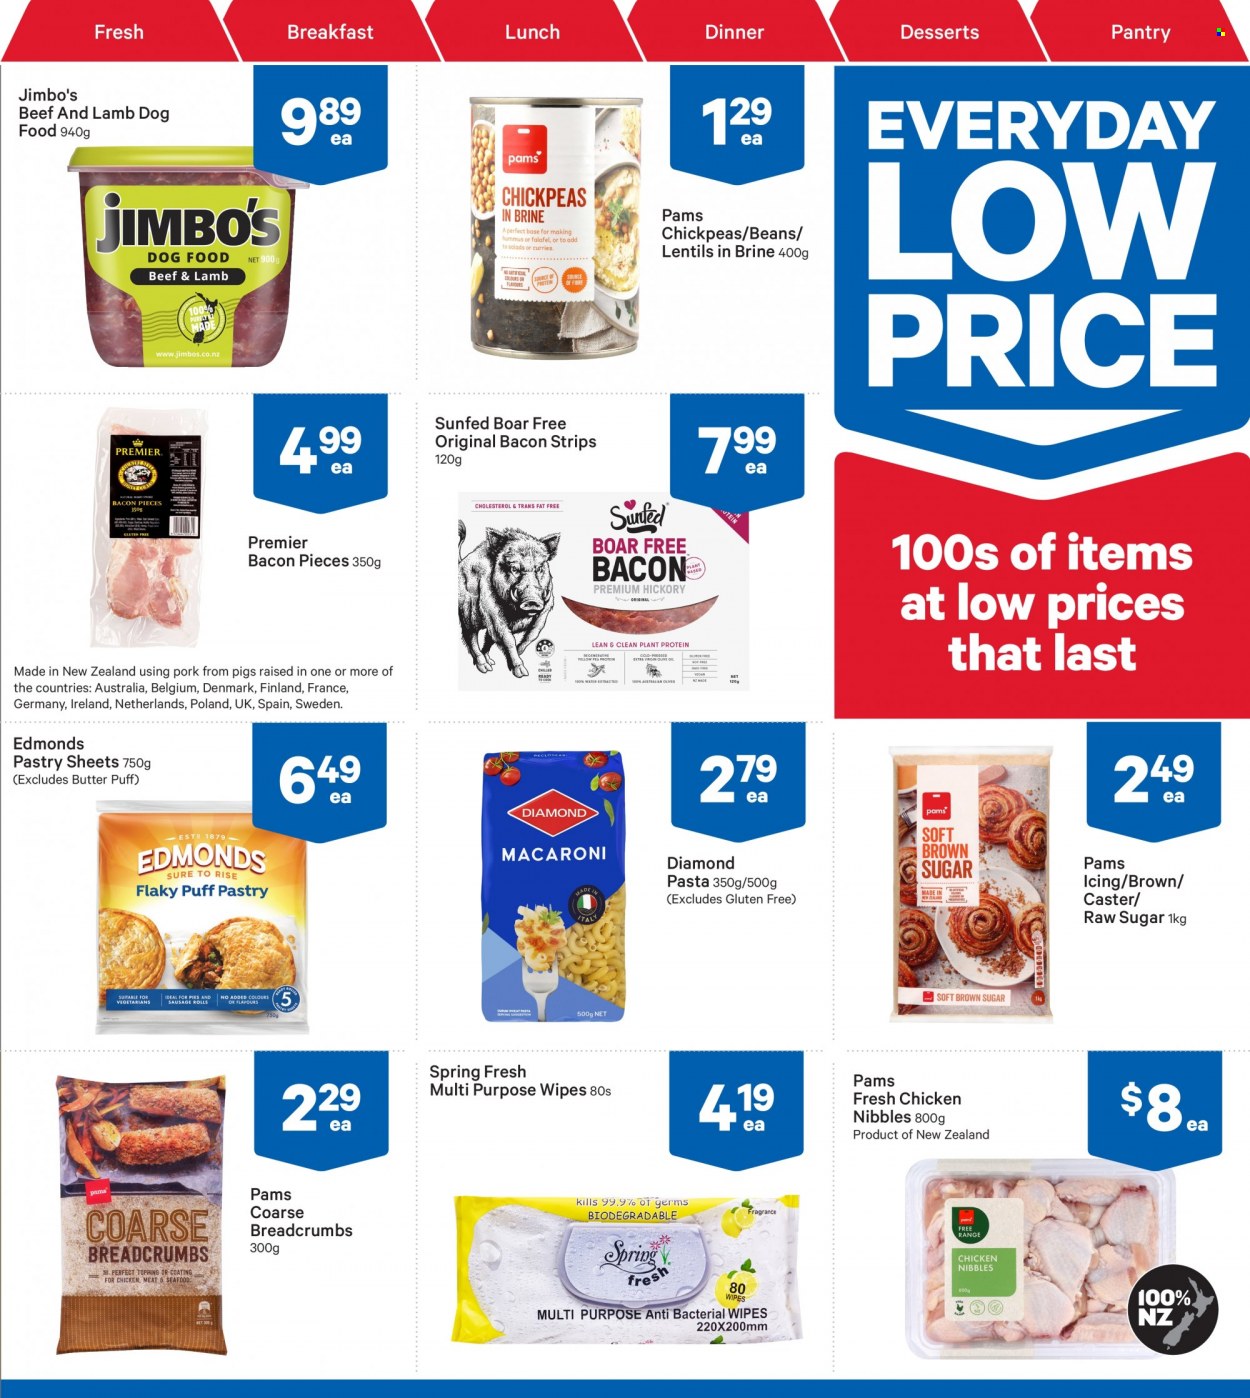 thumbnail - New World mailer - 28.11.2022 - 04.12.2022 - Sales products - sausage rolls, breadcrumbs, beans, seafood, macaroni, pasta, bacon, sausage, hummus, butter, puff pastry, strips, cane sugar, topping, plant protein, lentils, olives, chickpeas, extra virgin olive oil, olive oil, oil, wipes, Raw Sugar, fragrance, Sure, animal food, dog food. Page 27.